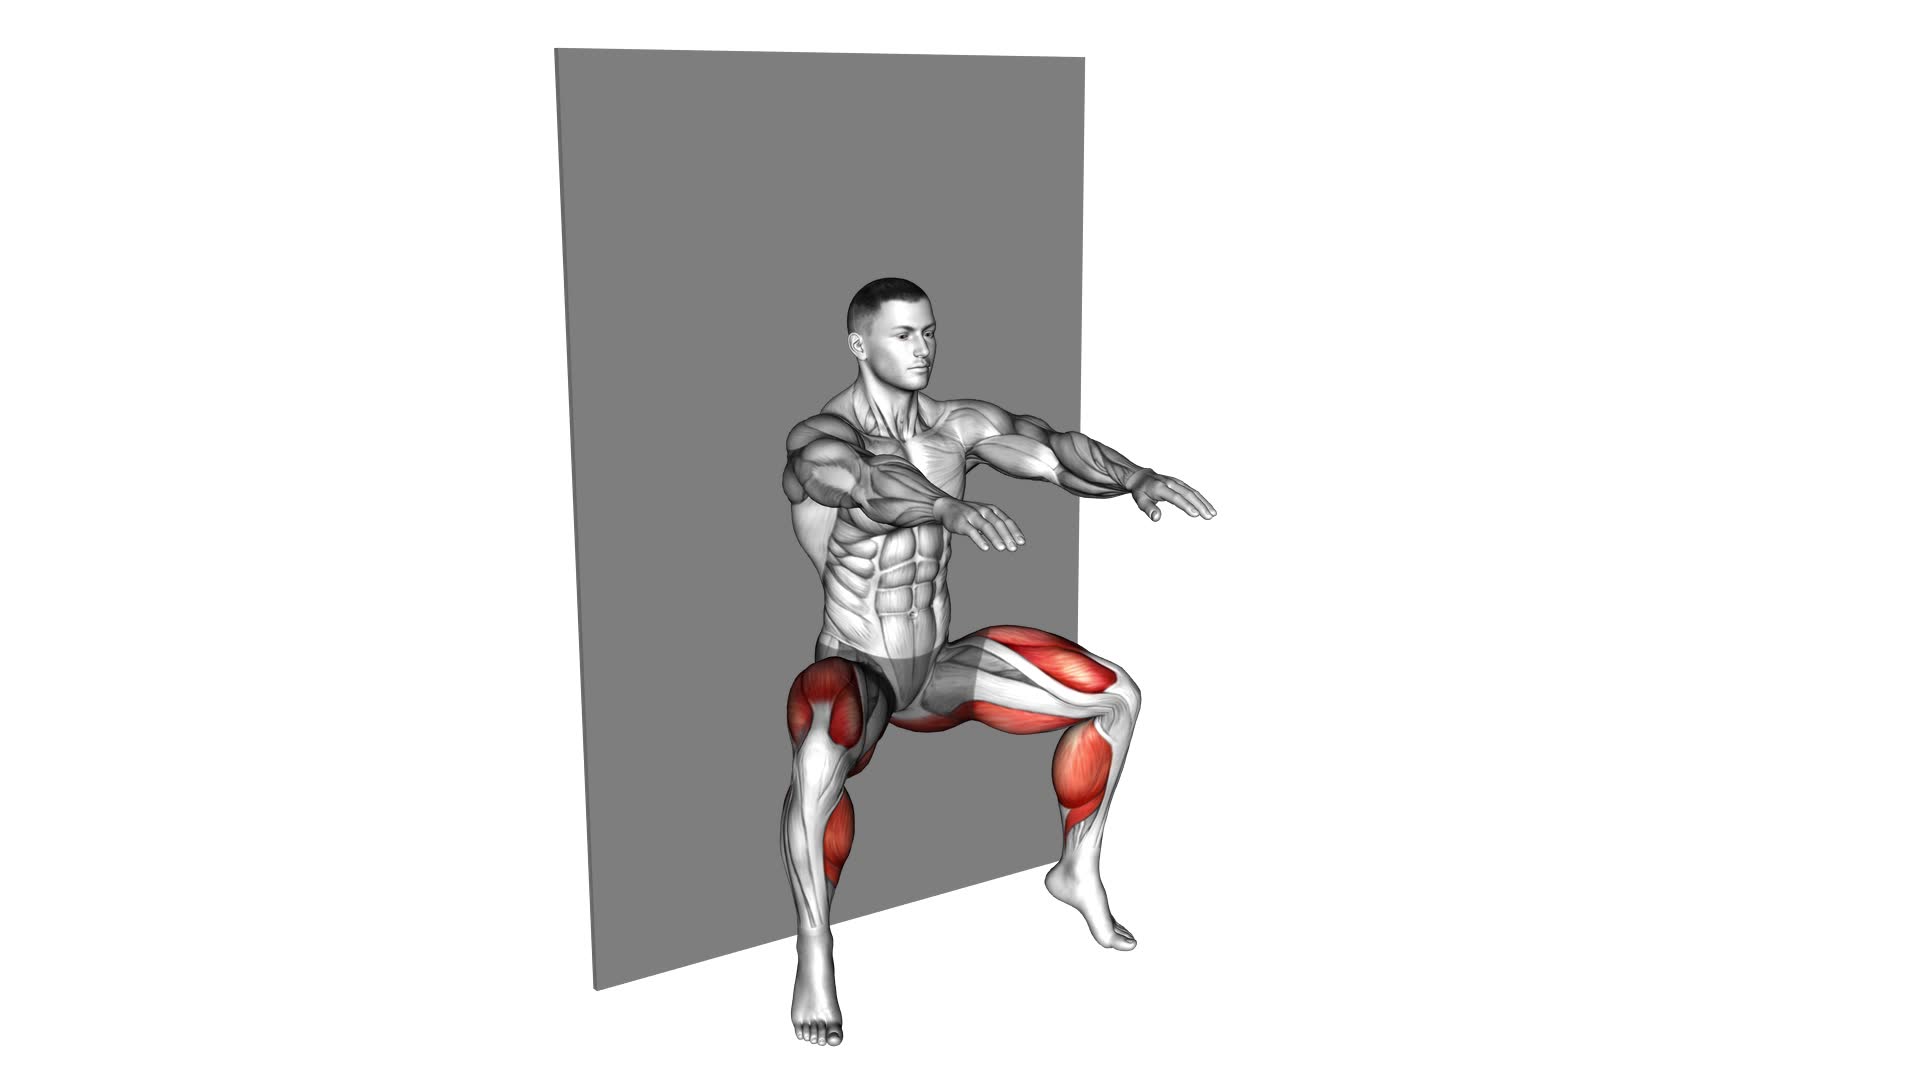 Plyo Sit Squat (wall) - Video Exercise Guide & Tips